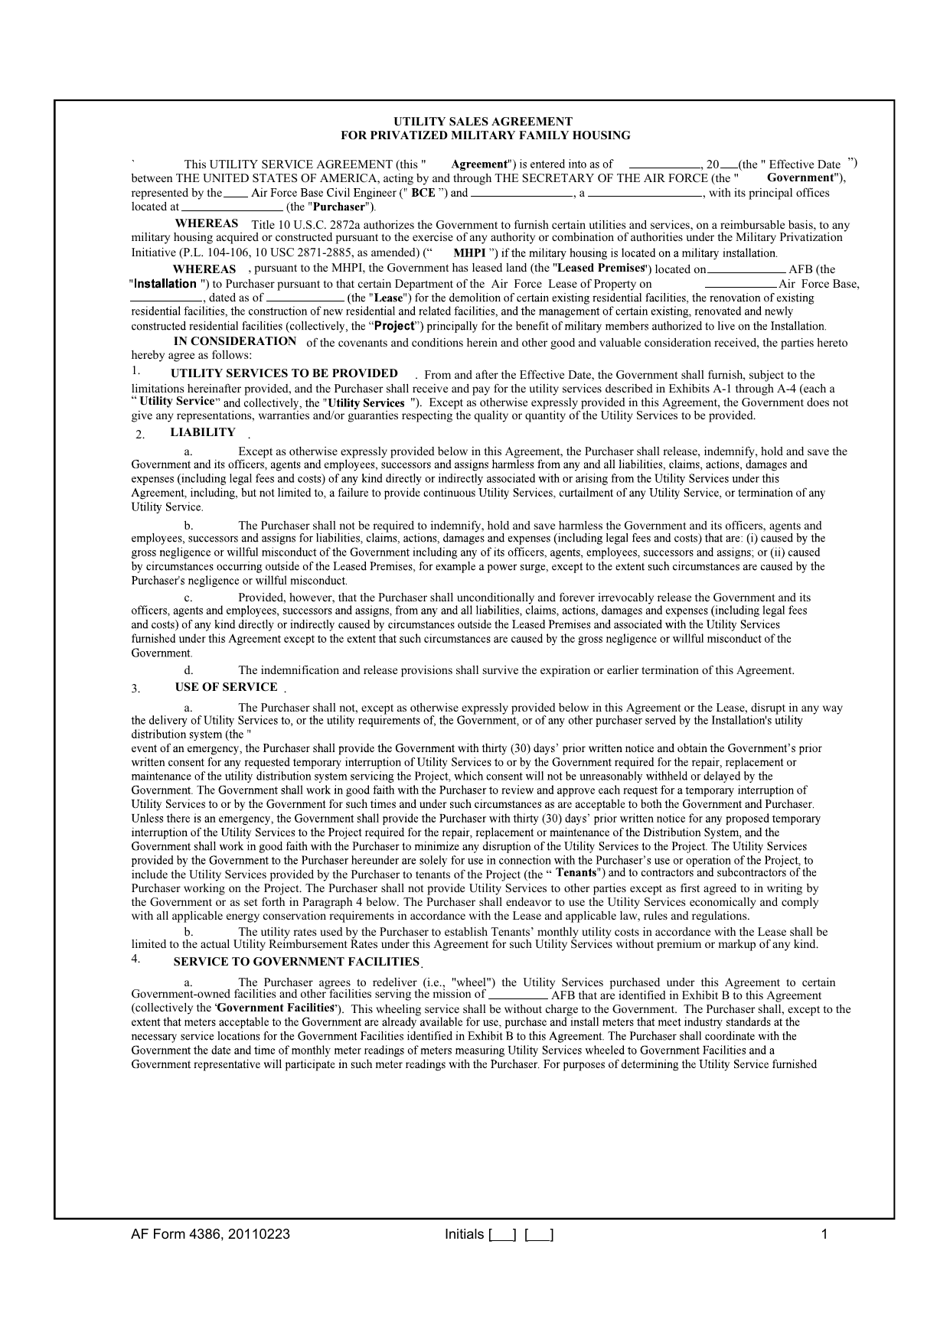 AF Form 4386 Utility Sales Agreement for Privatized Military Family Housing, Page 1